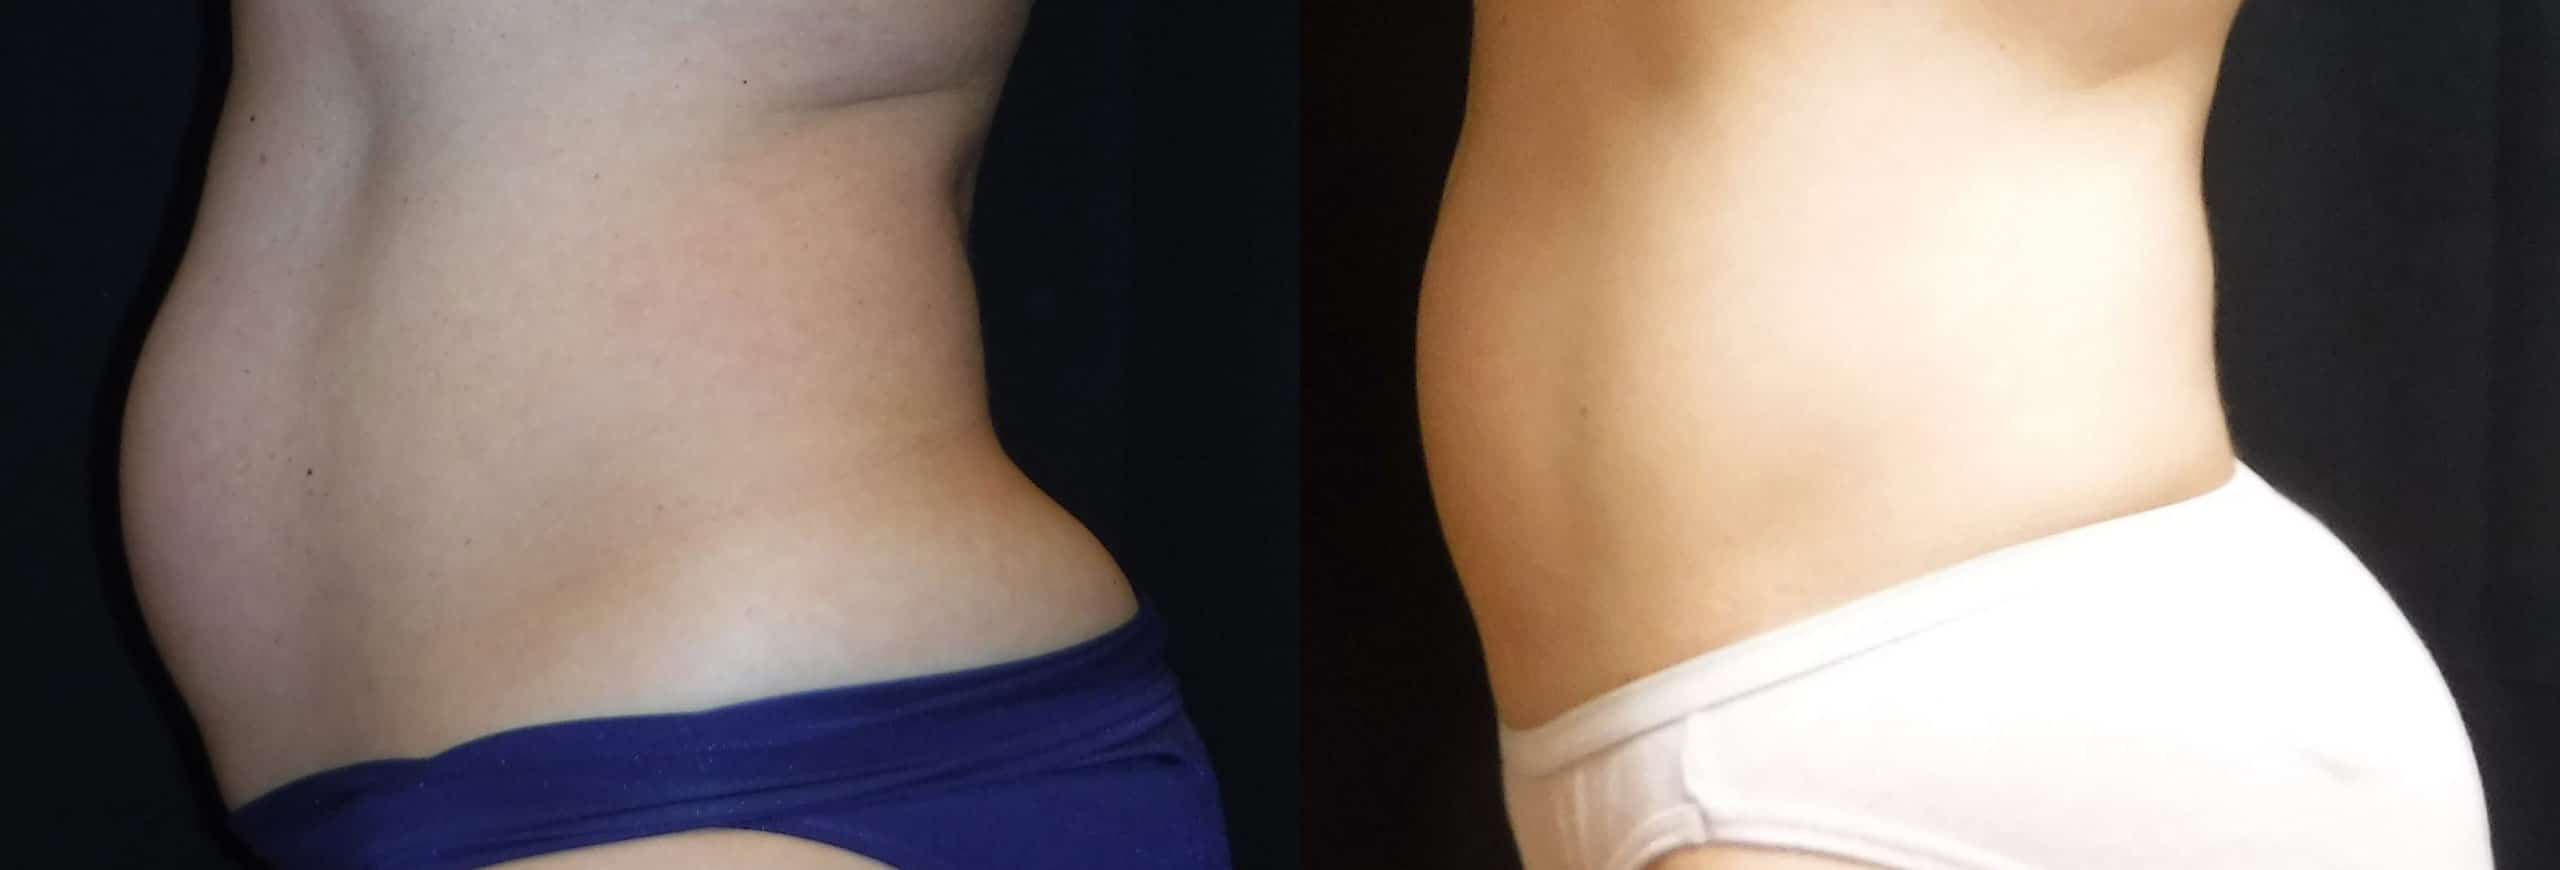 fat reduction before and after